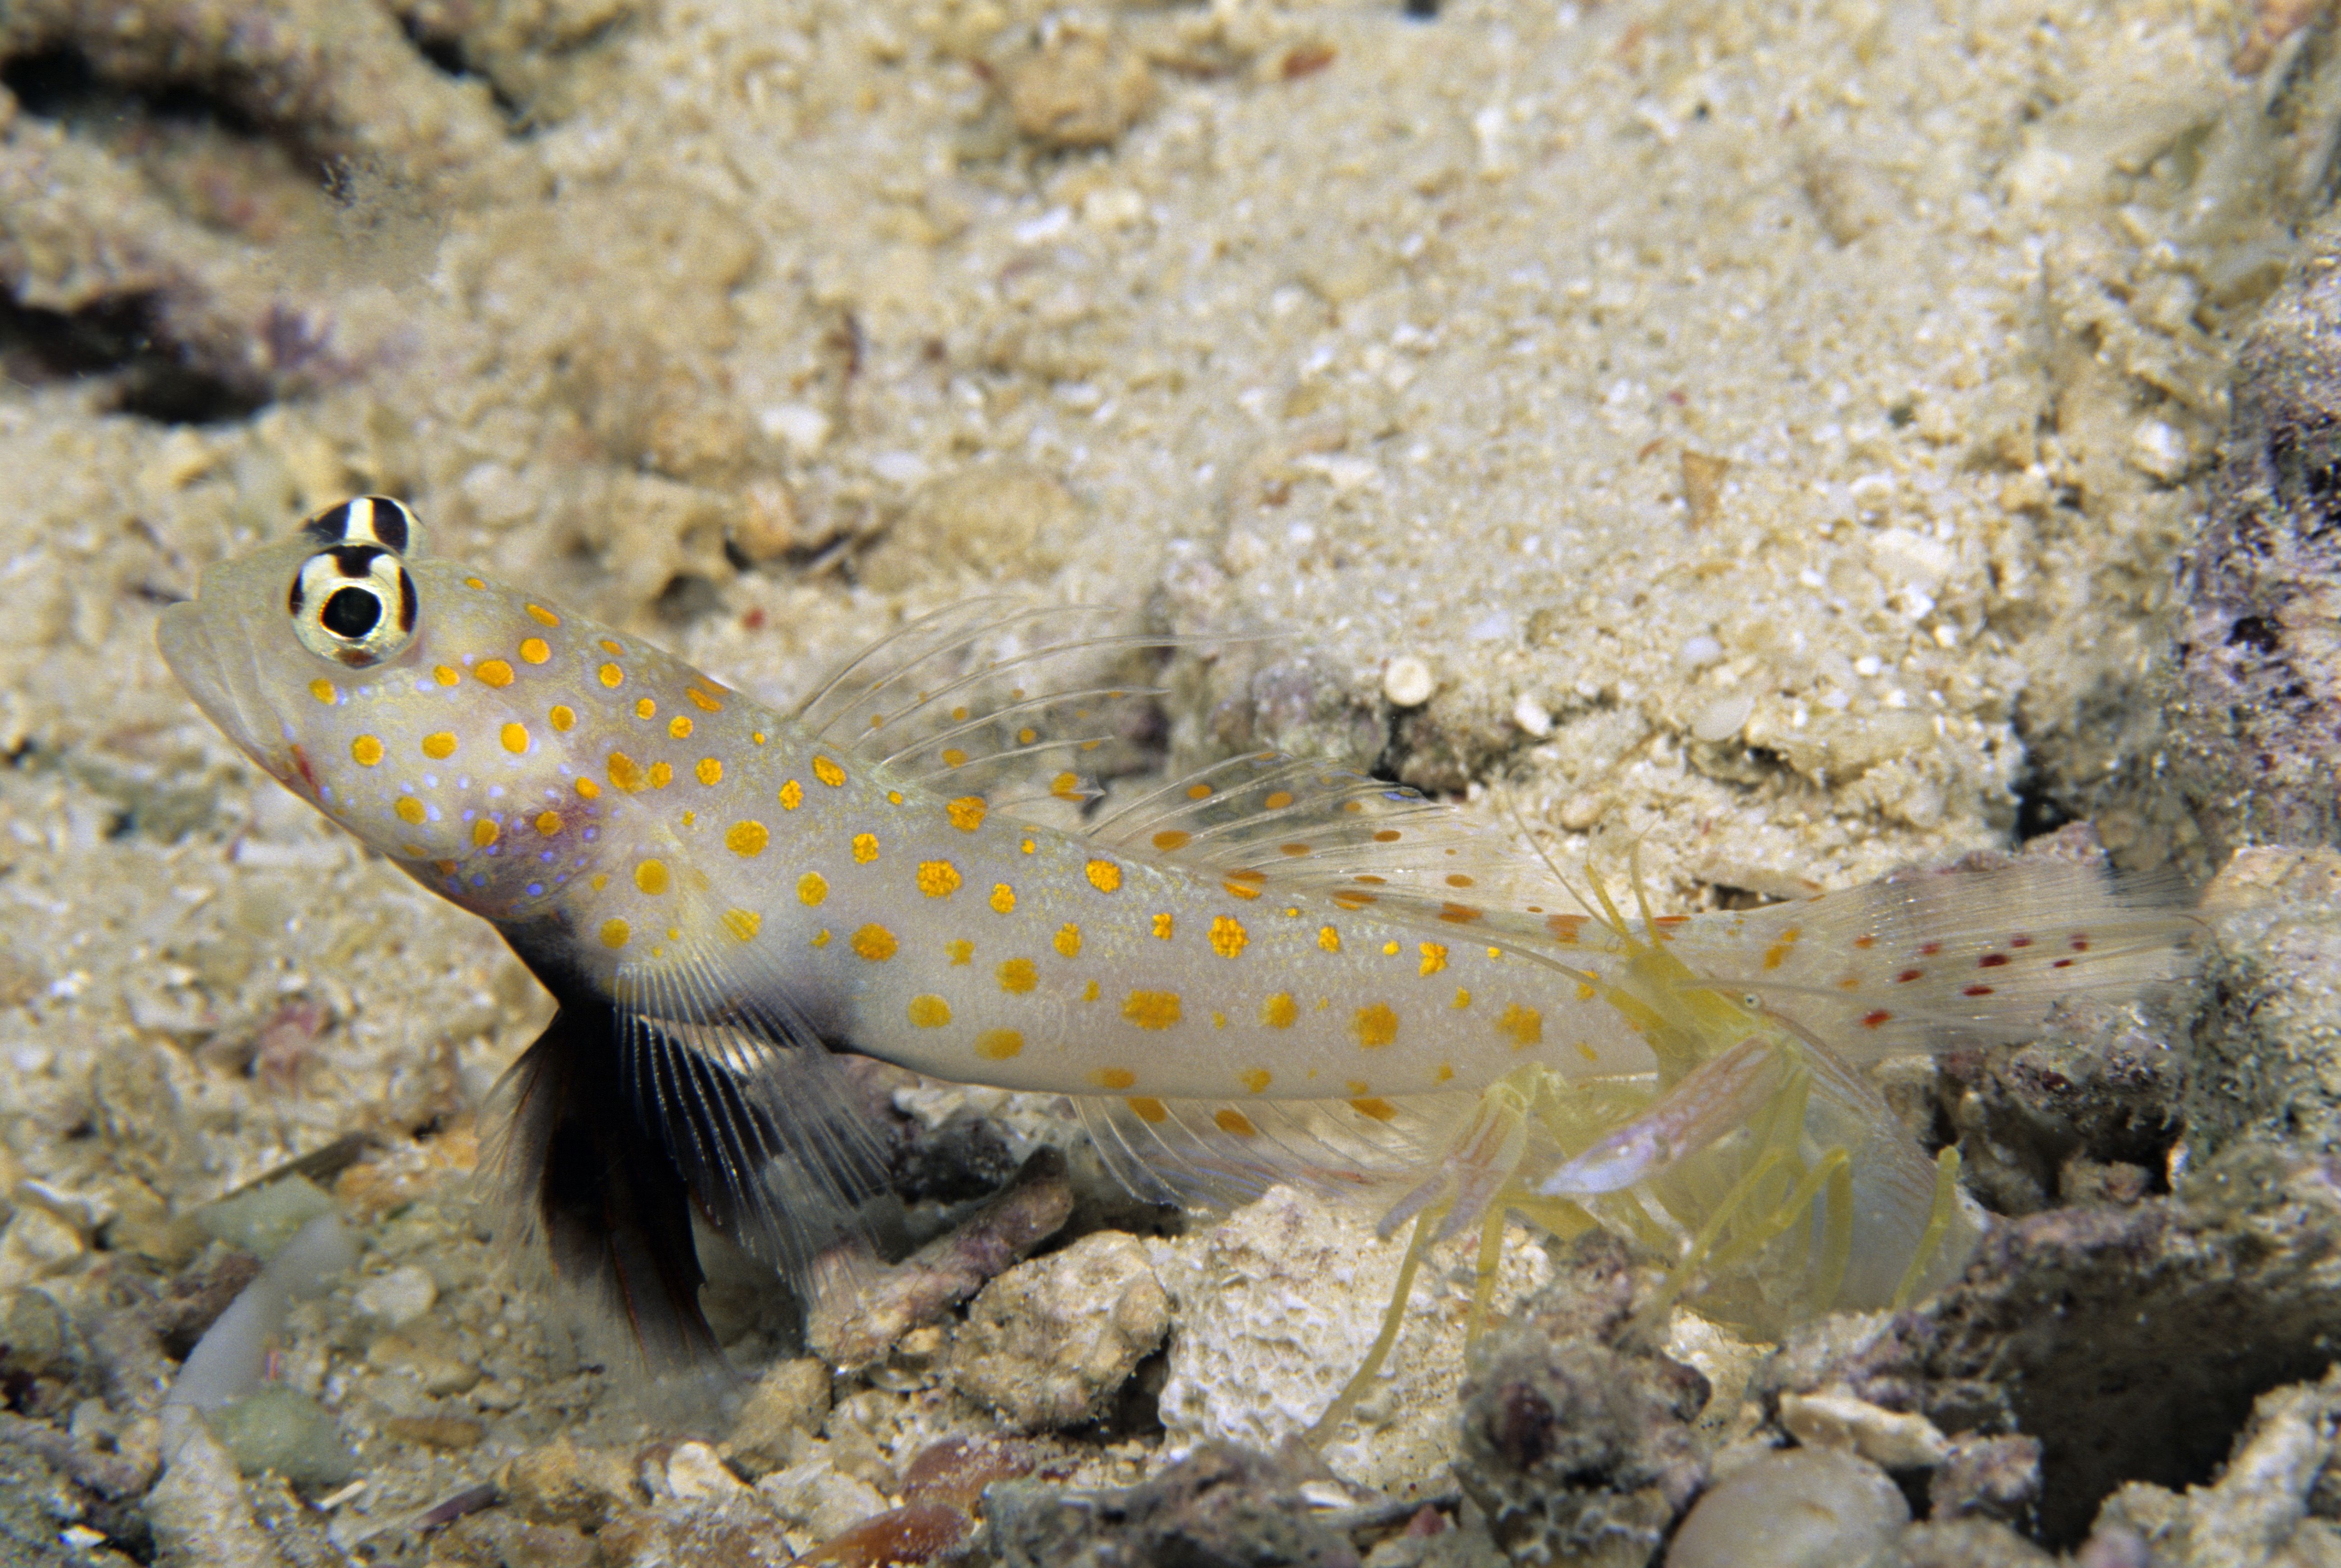 Symbiosis between blind Shrimp, Alpheus sp., and Spotted Shrimp Goby, Amblyeleotris guttata. Shrimp maintains burrow and keeps antenna on Goby to monitor movement as the latter acts as watchdog, Christines Reef, Kimbe Bay, PNG